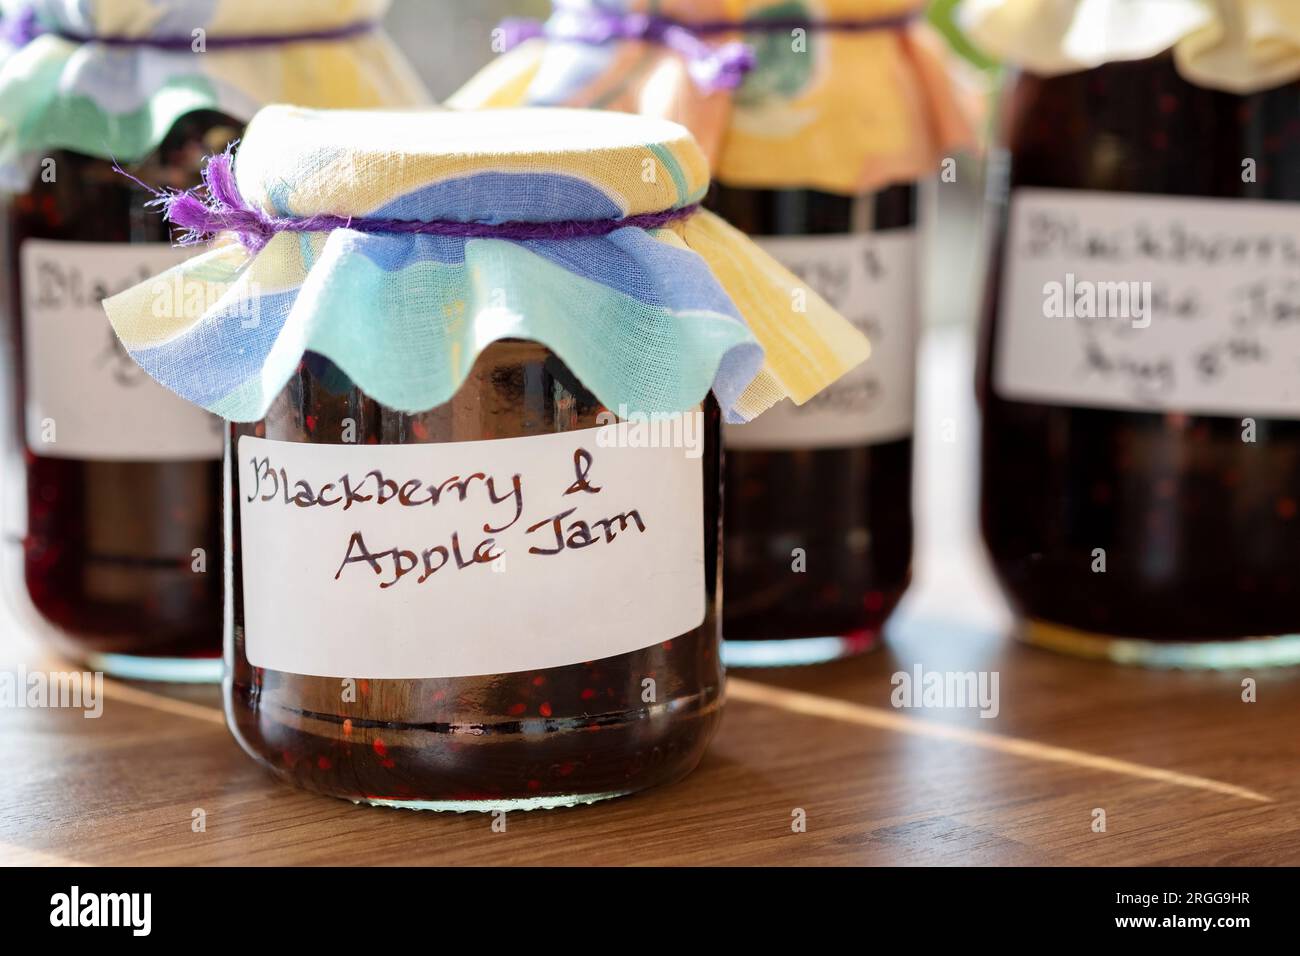 Jars of homemade Blackberry and apple jam. the jars have clear handwritten lables and the jars have a cloth topping Stock Photo